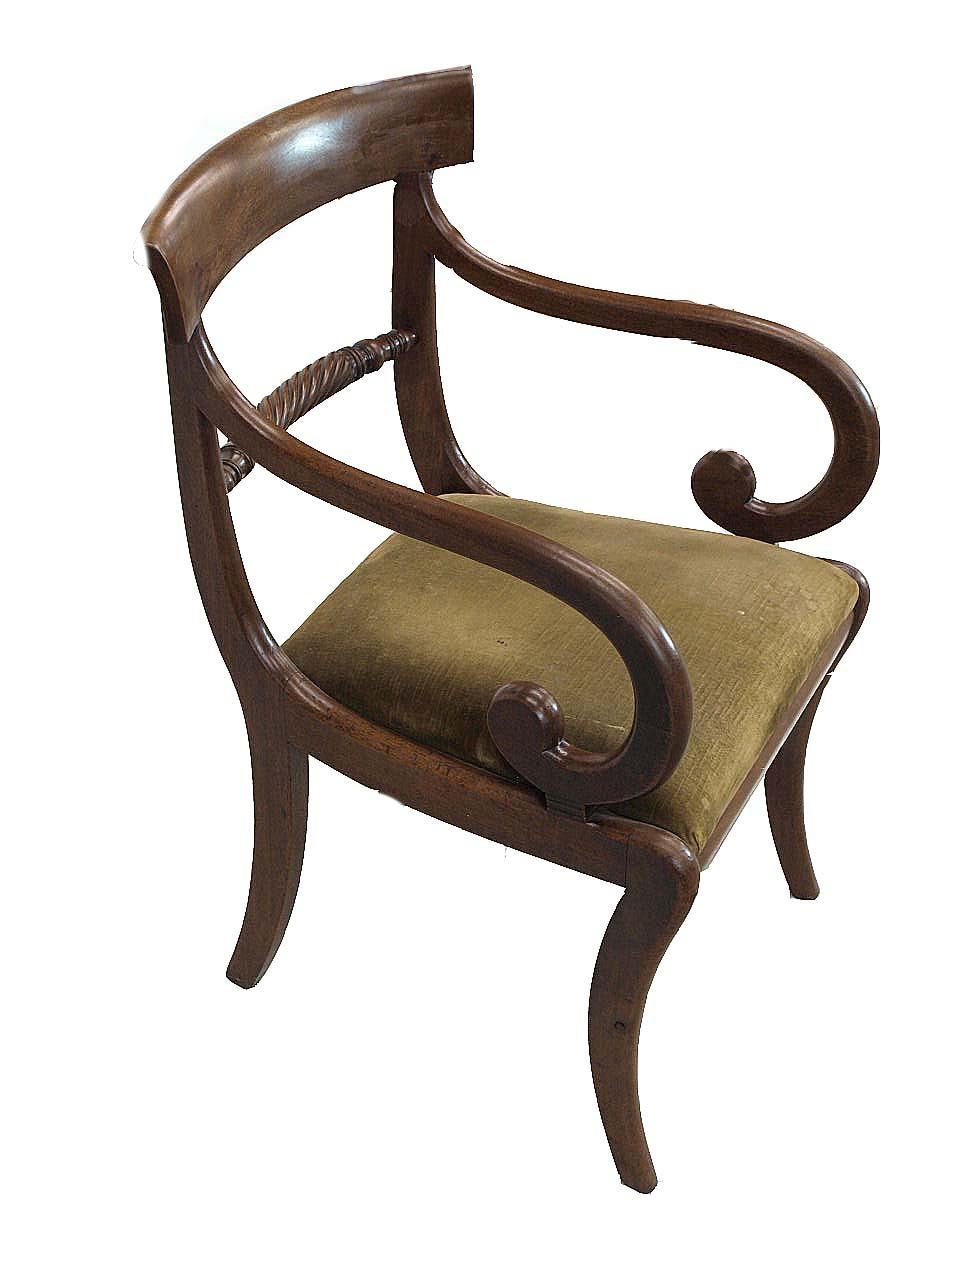 English Regency mahogany armchair, bowed crest rail with arched edge above the rope carved lumbar rail. The sweeping back legs, beautifully scrolled arms and graceful saber shaped front legs along with an aged patina and color make this a very